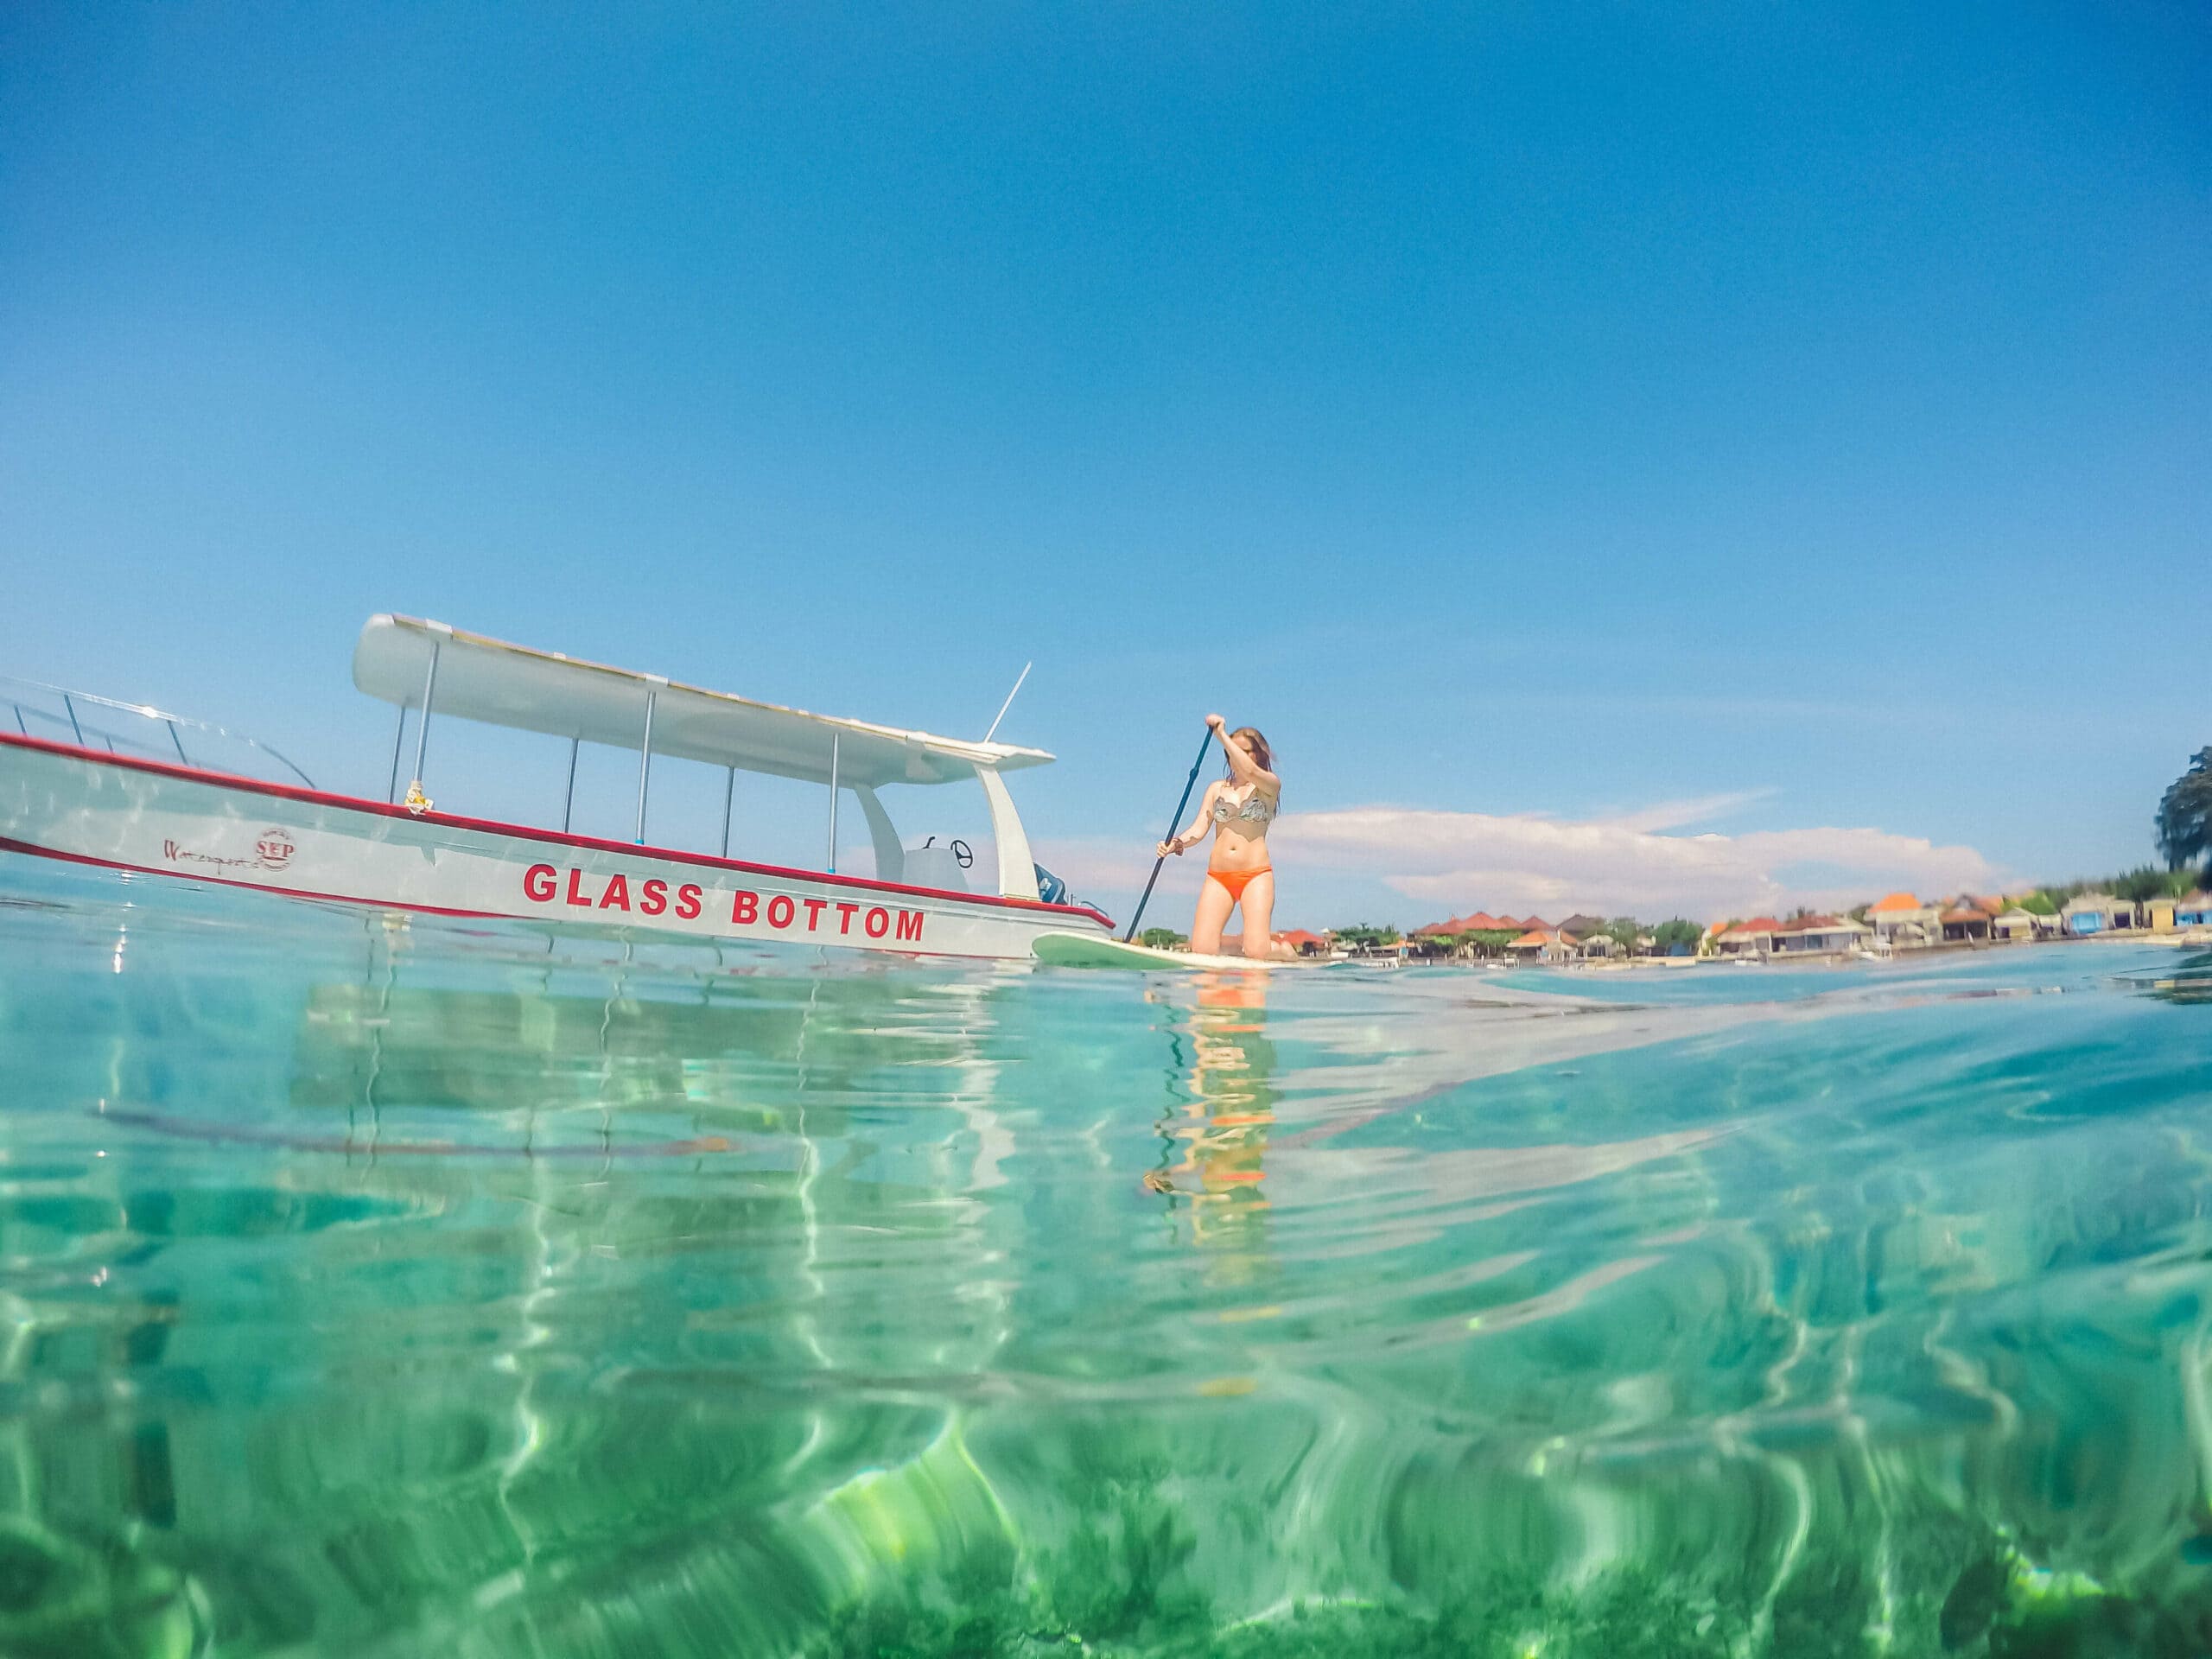 Girl paddle boarding on clear turquoise water with a glass bottom boat in the background on a day trip to Nusa Lembongan.